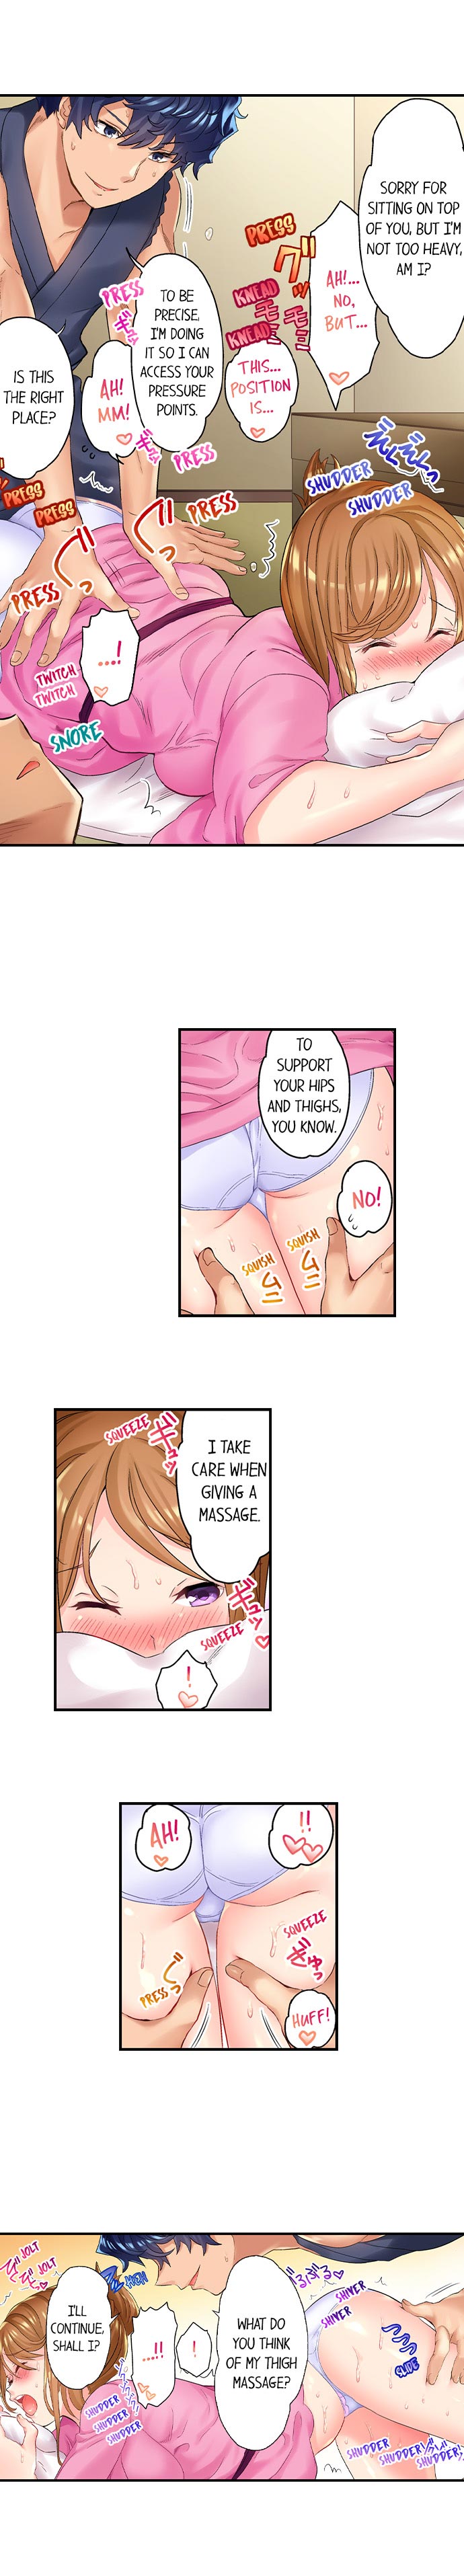 NTR Massage Chapter 2 - Page 7